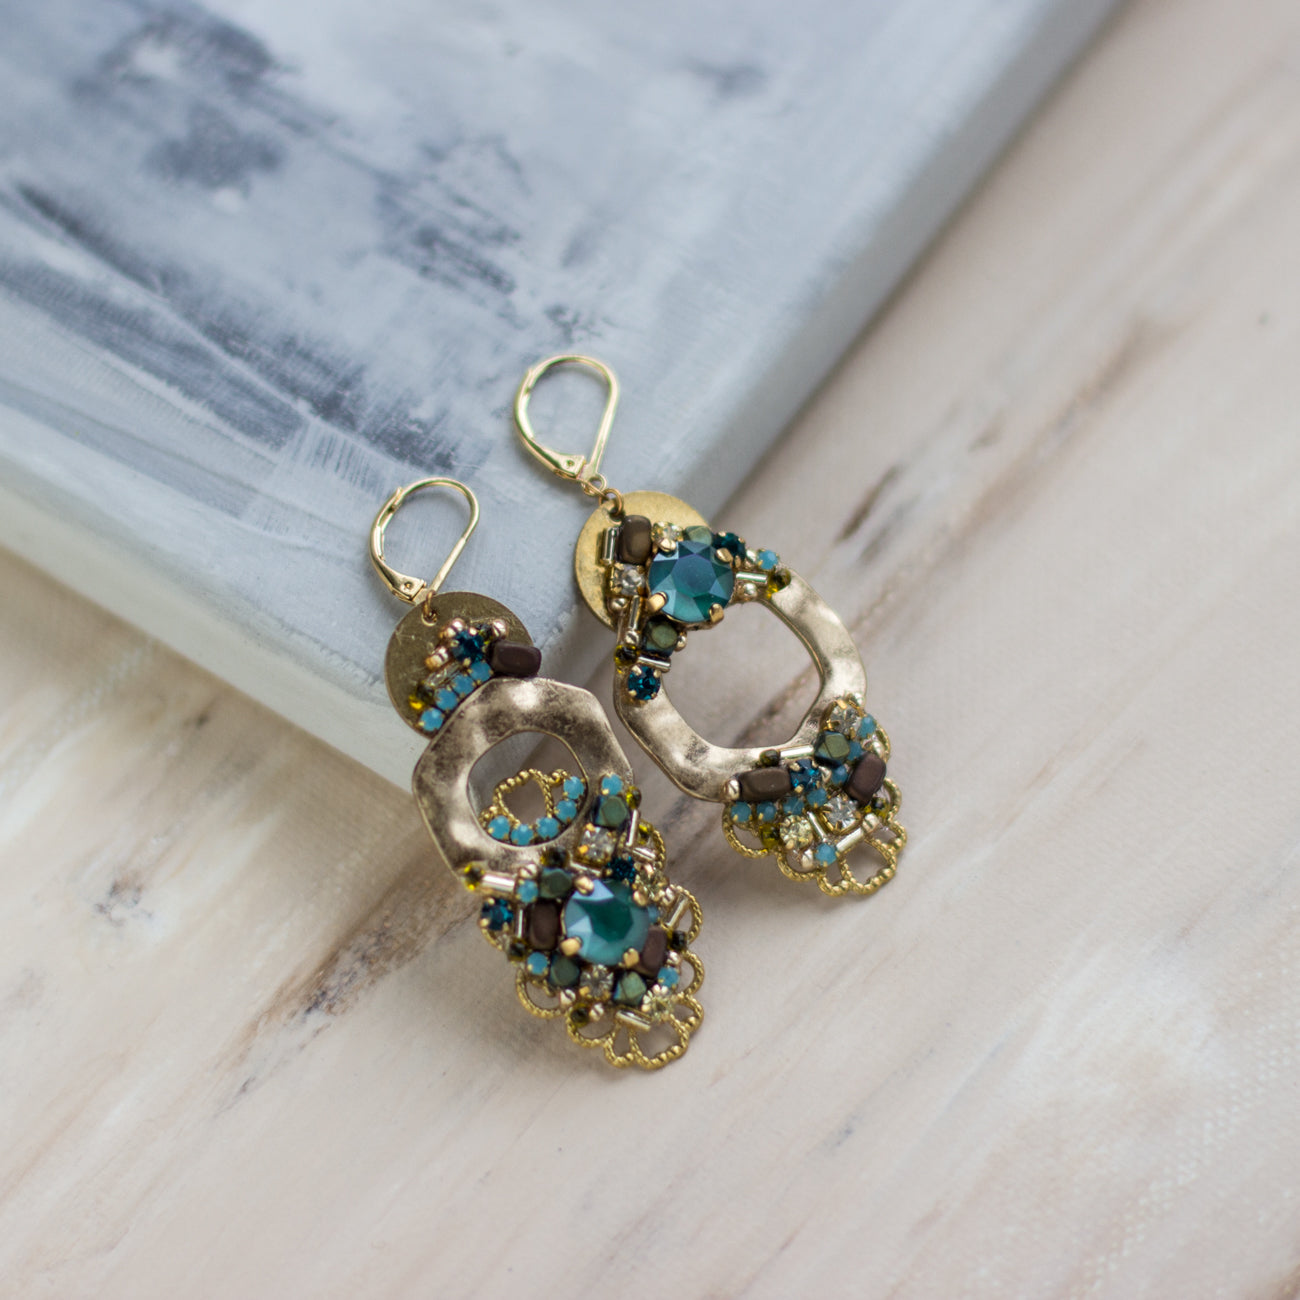 Gold green earrings. Green gold Evening earrings. asymmetric Woman jewelry. Crystal green gold earrings. Chic Rhinestone jewelry. Shop women's jewelry at LeFlowers Bijouterie to discover unique handmade pieces for your wardrobe. 